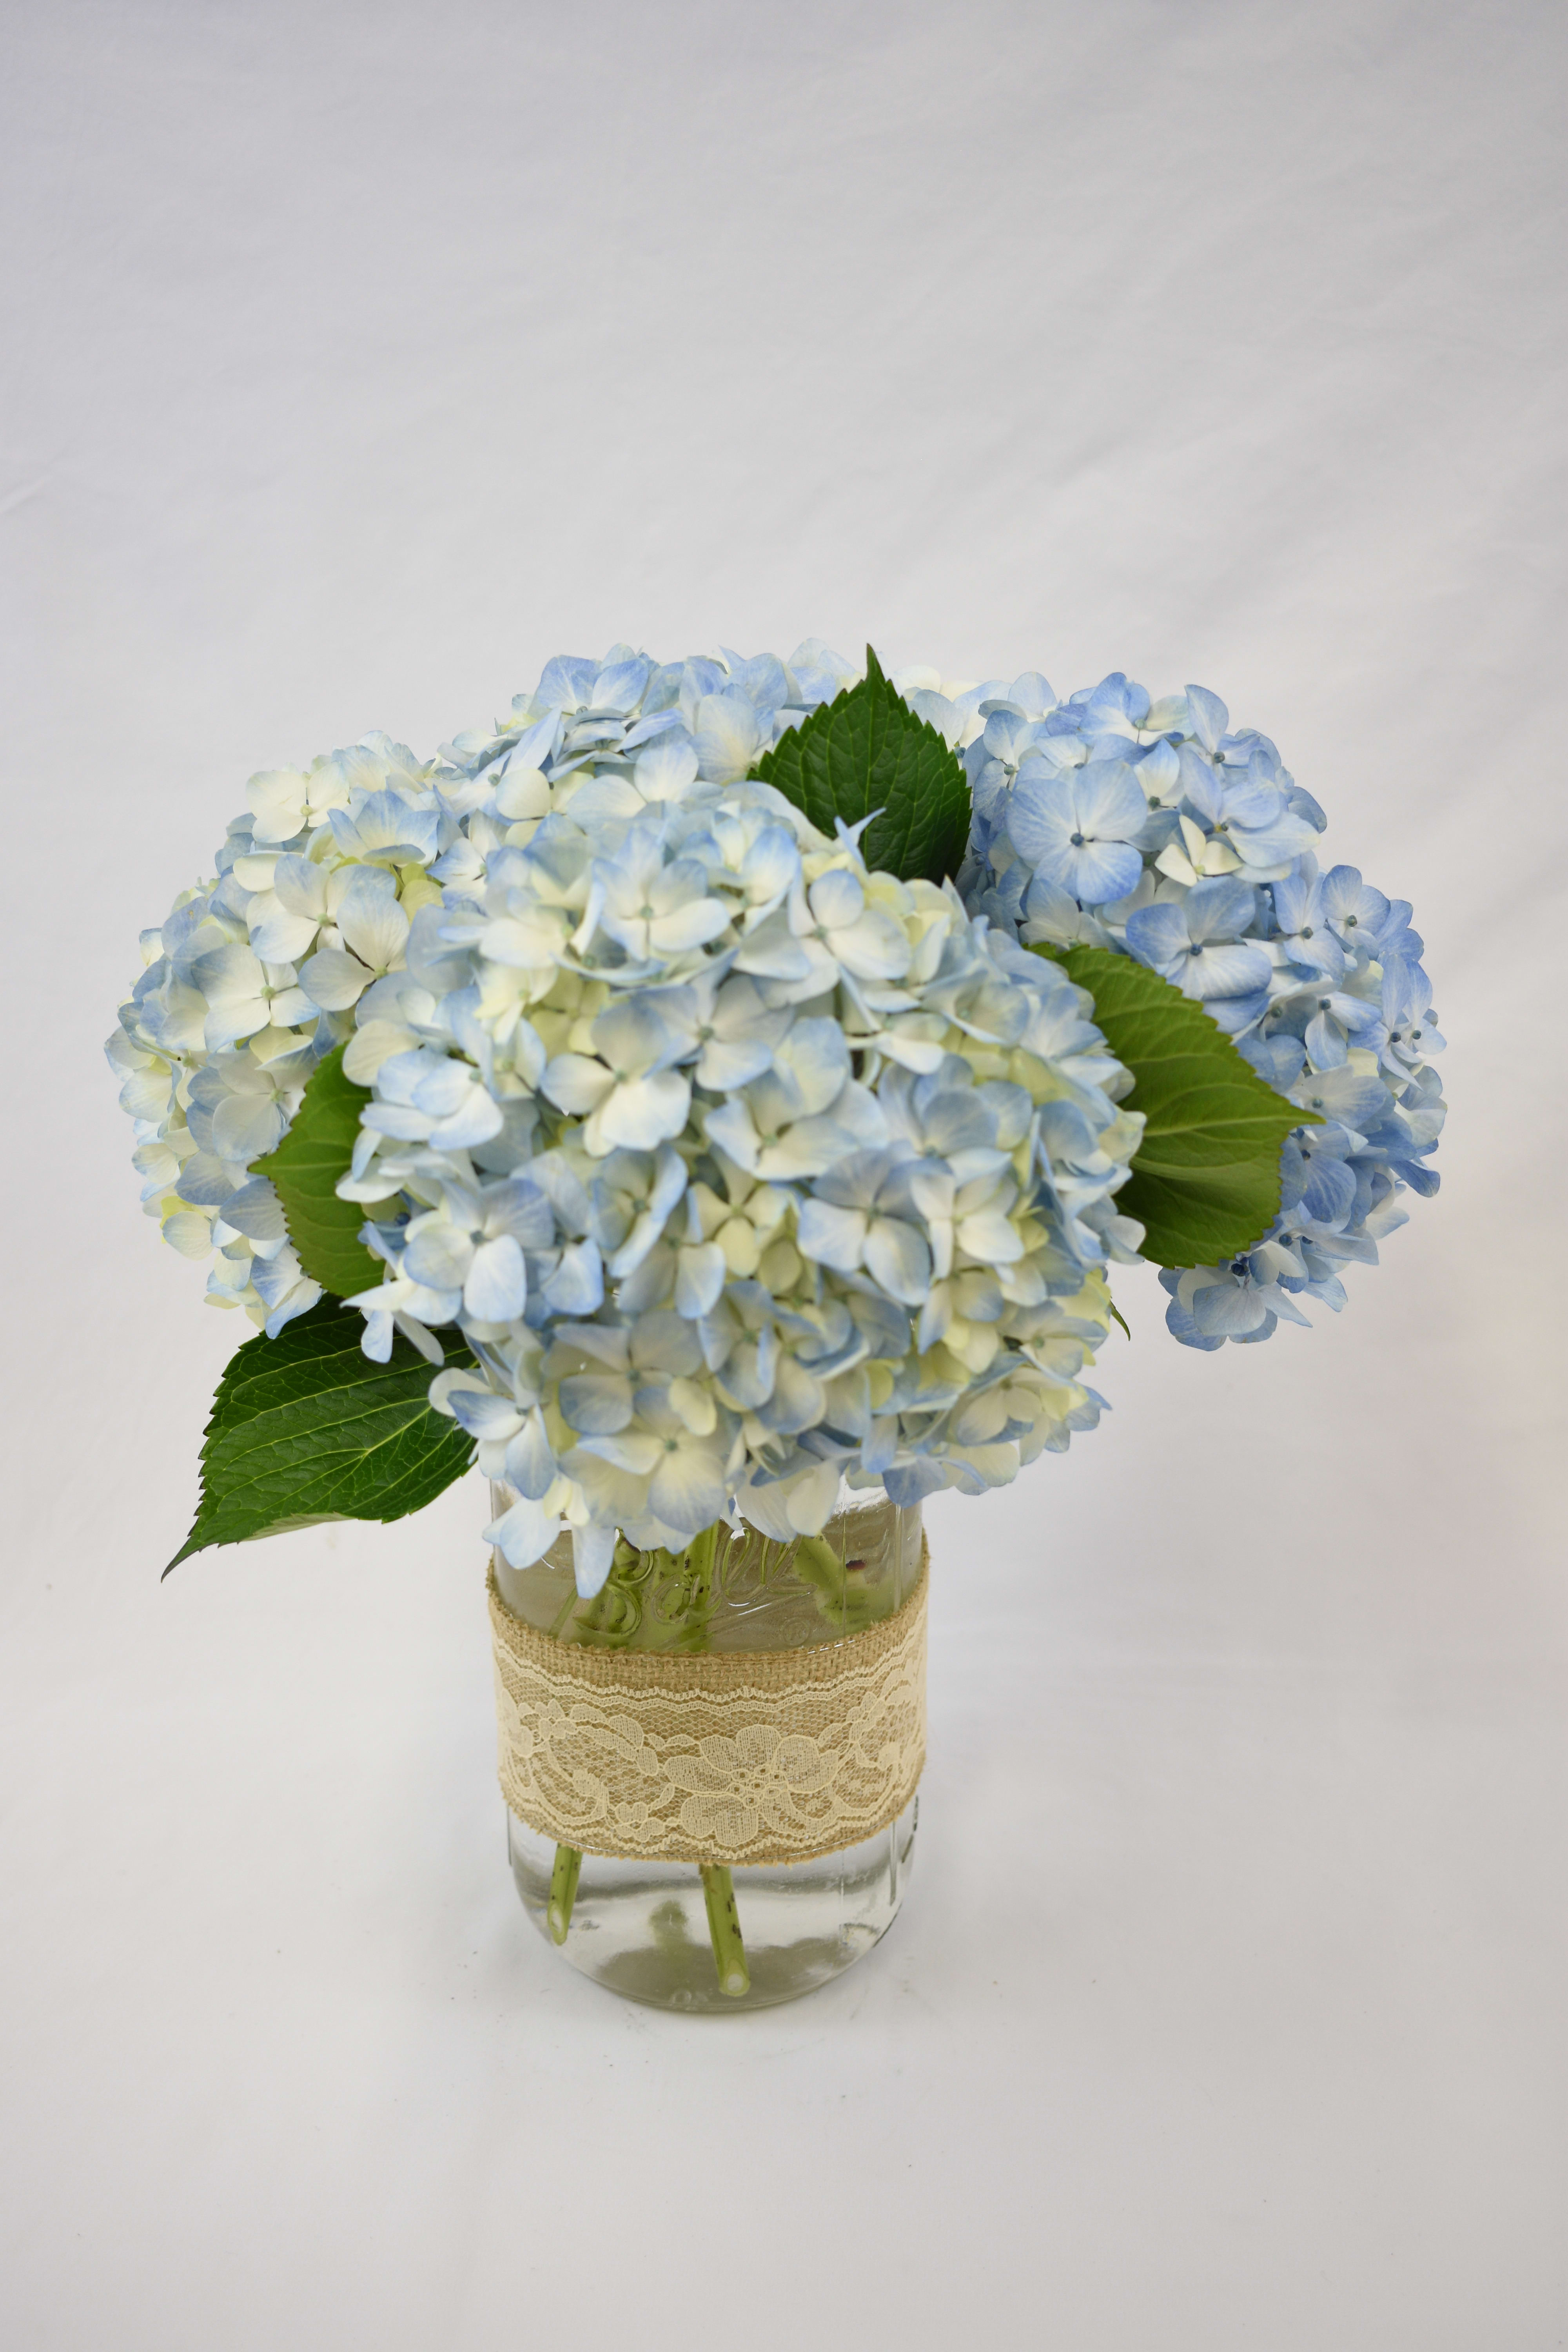 Hydrangea heaven  - A half gallon mason jar, decorated with burlap and lace, filled with beautiful hydrangeas.  